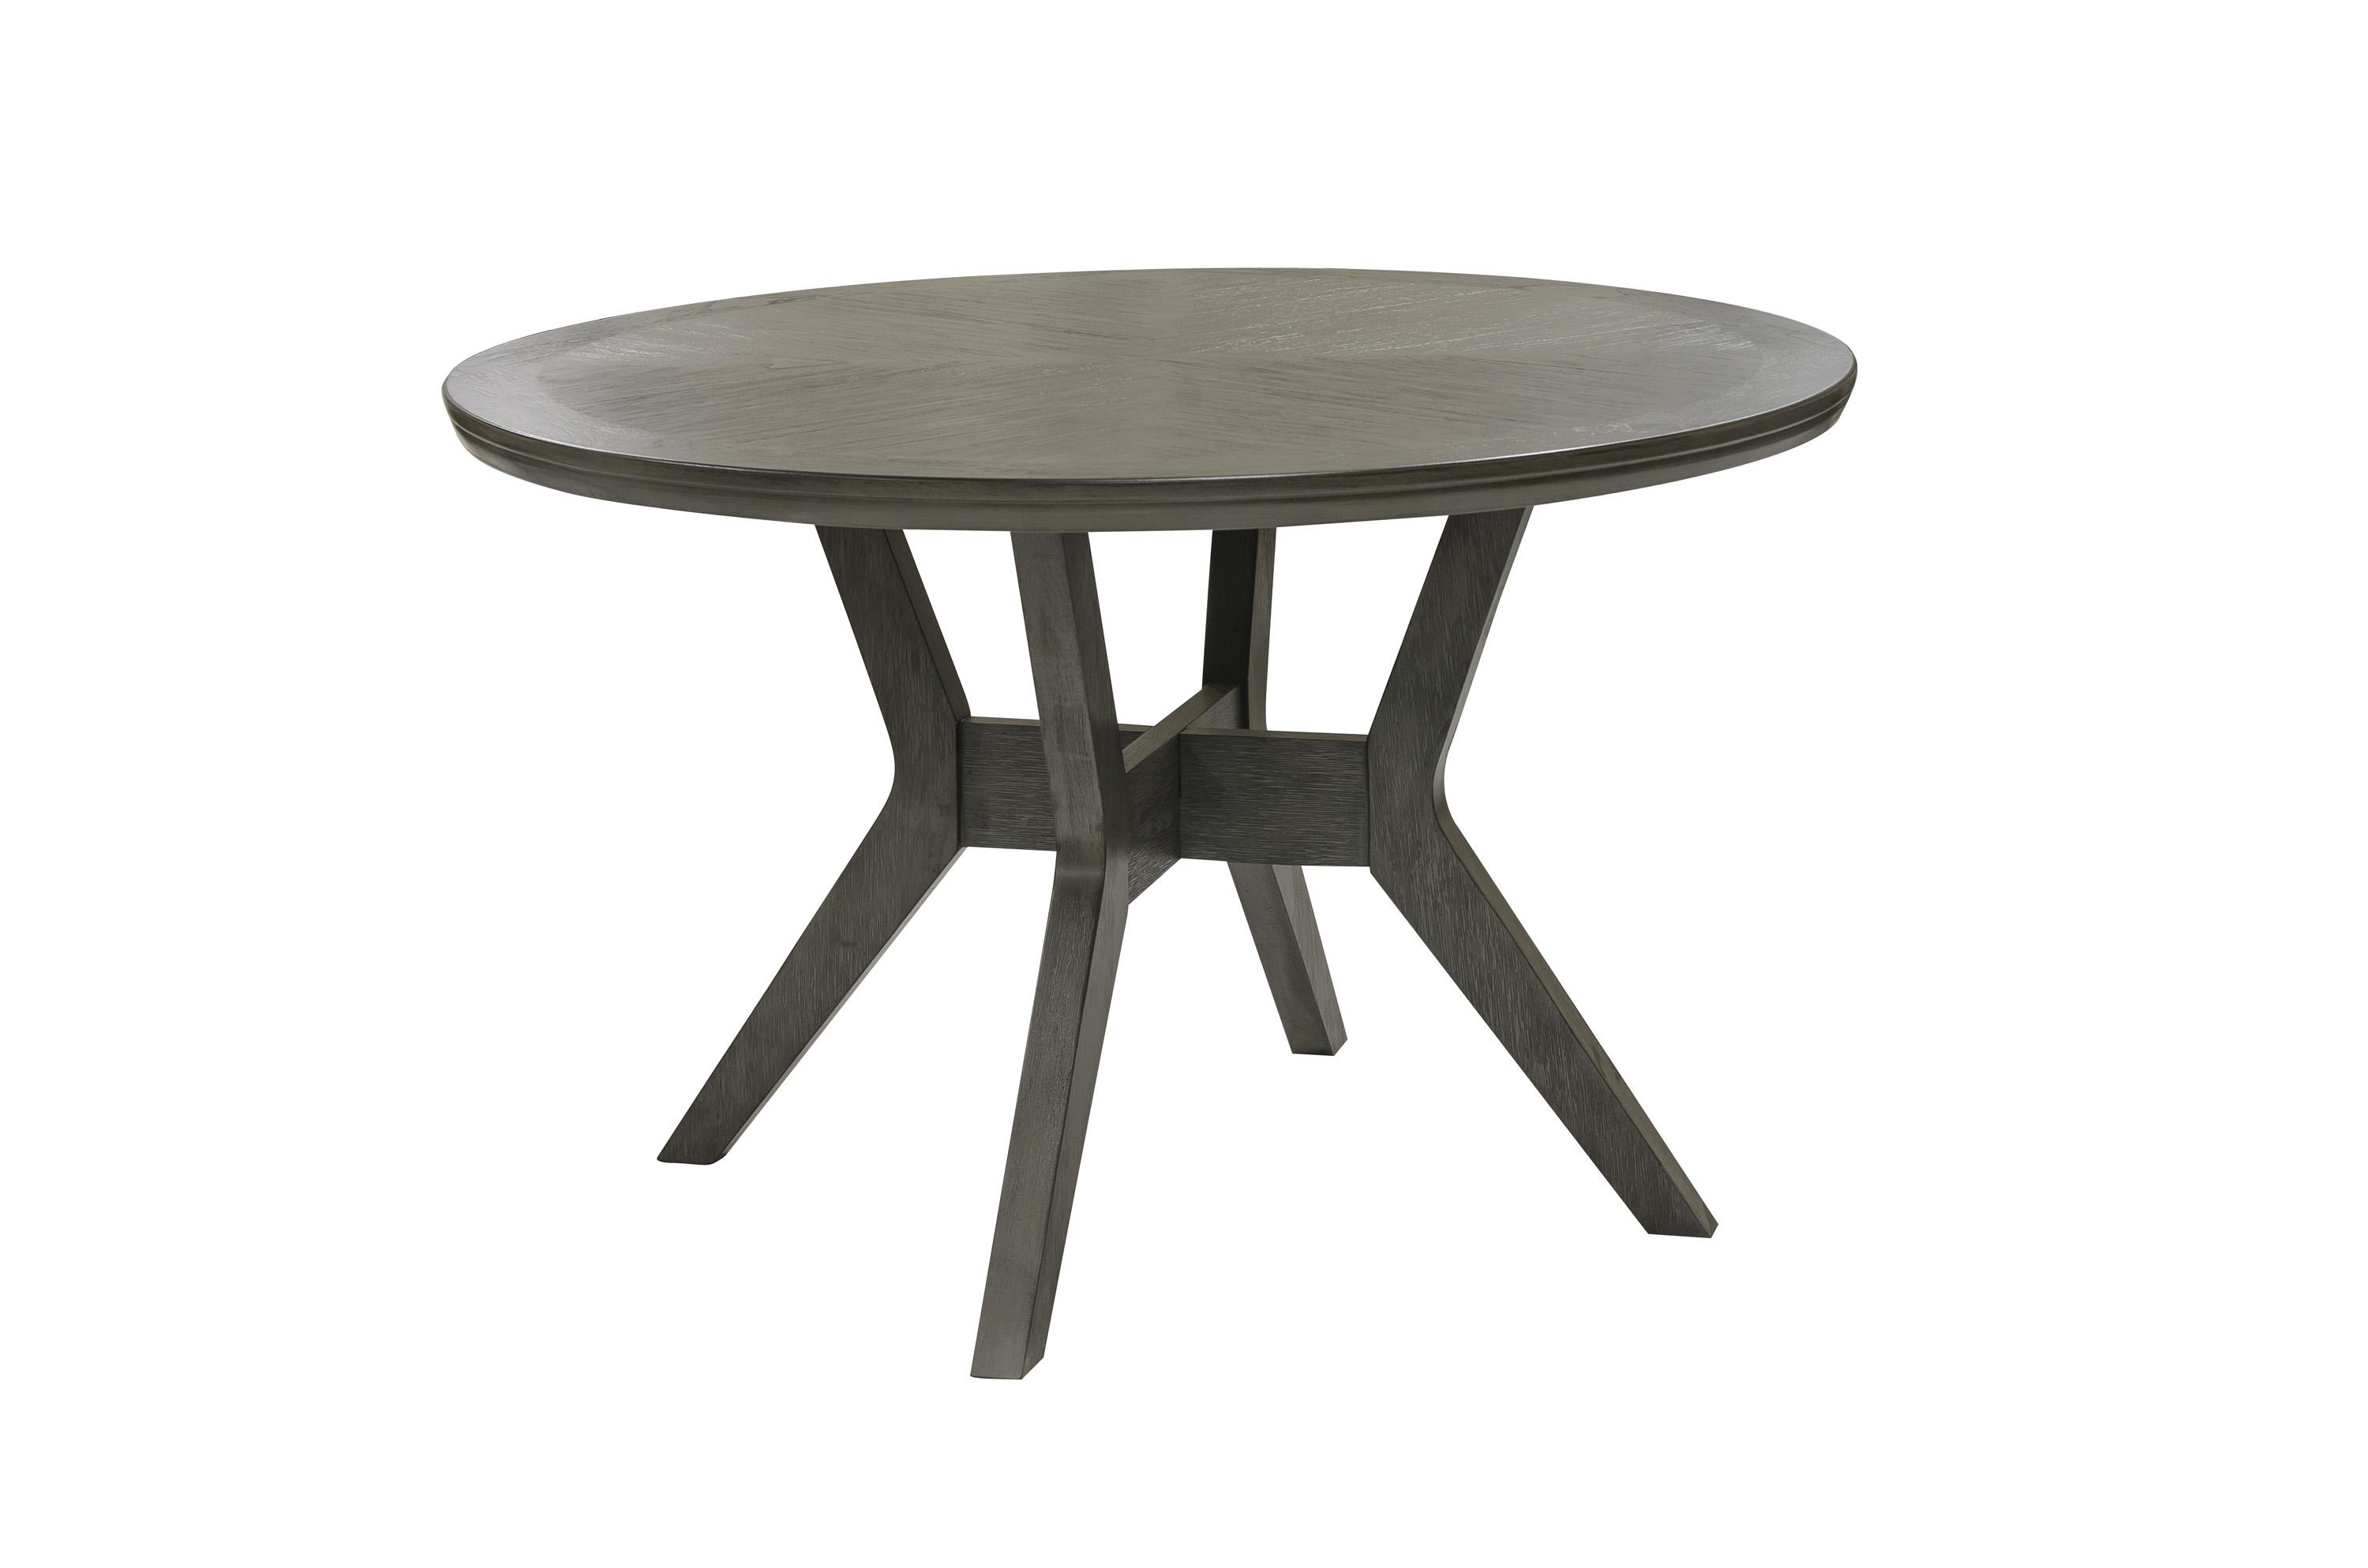 Transitional Dining Table 5165GY-48 Nisky 5165GY-48 in Gray 